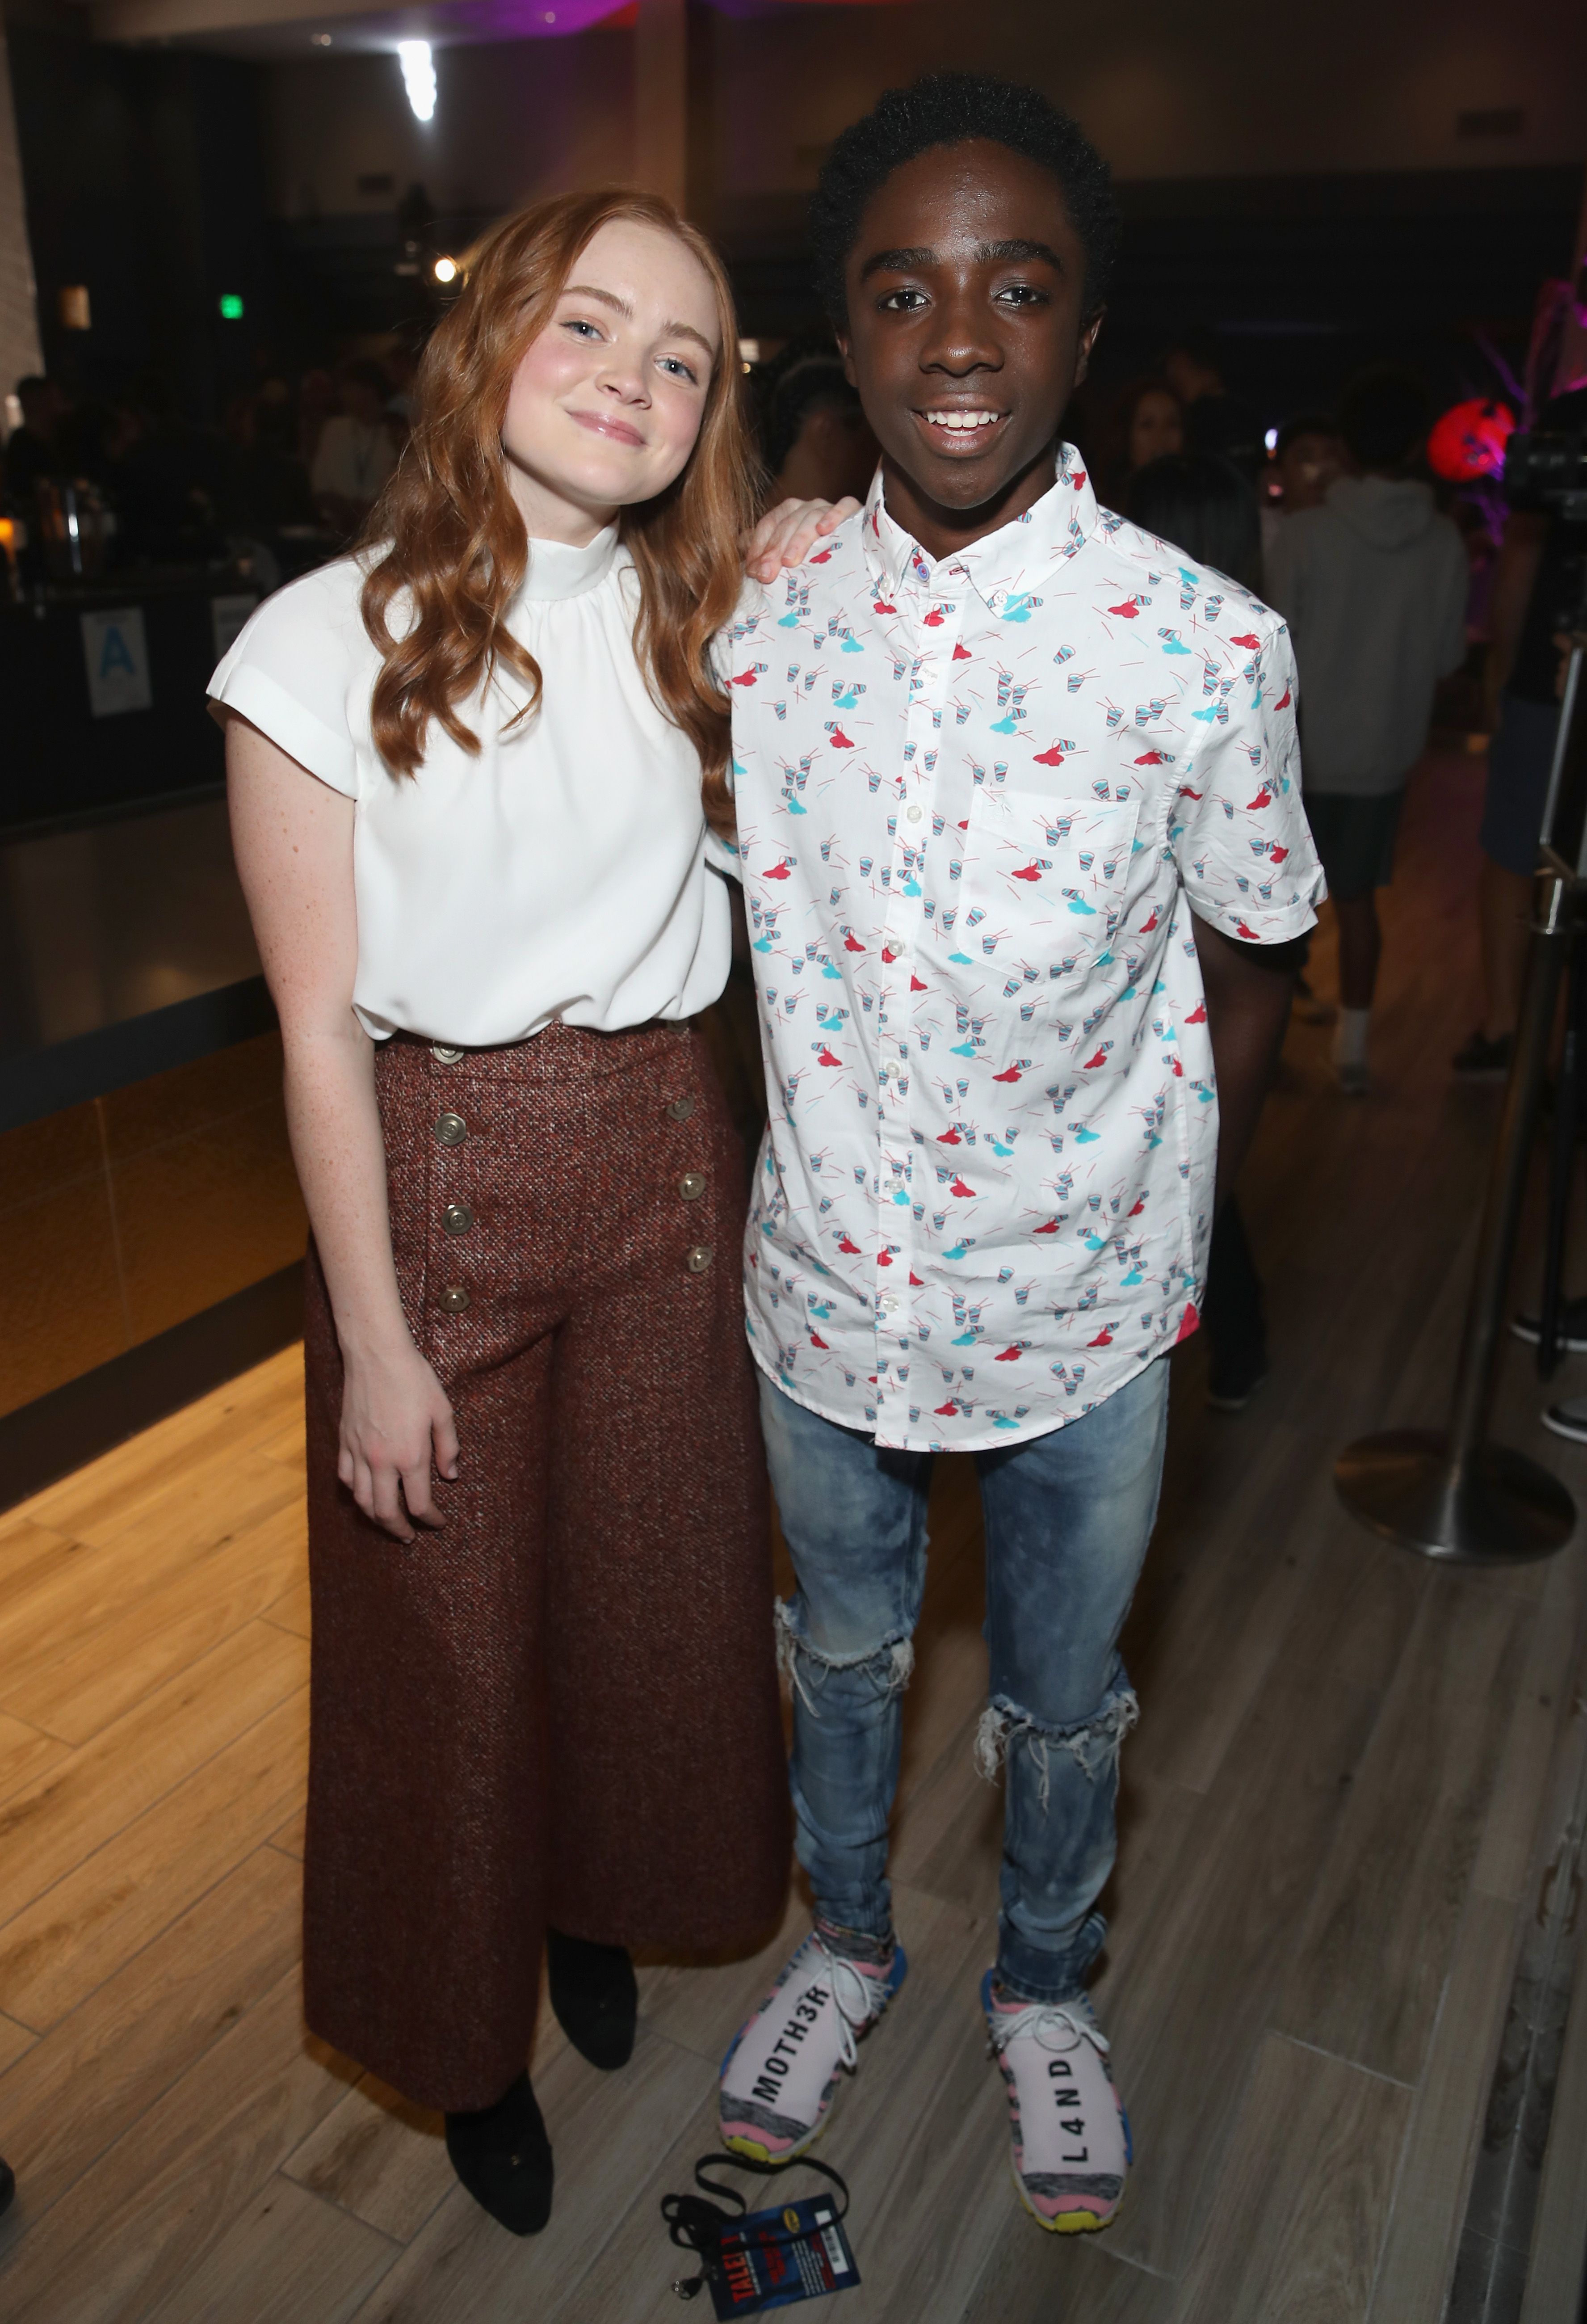 Sadie Sink Talks About What It Was Like to Kiss Caleb McLaughlin On Stranger Things For the 1st Time